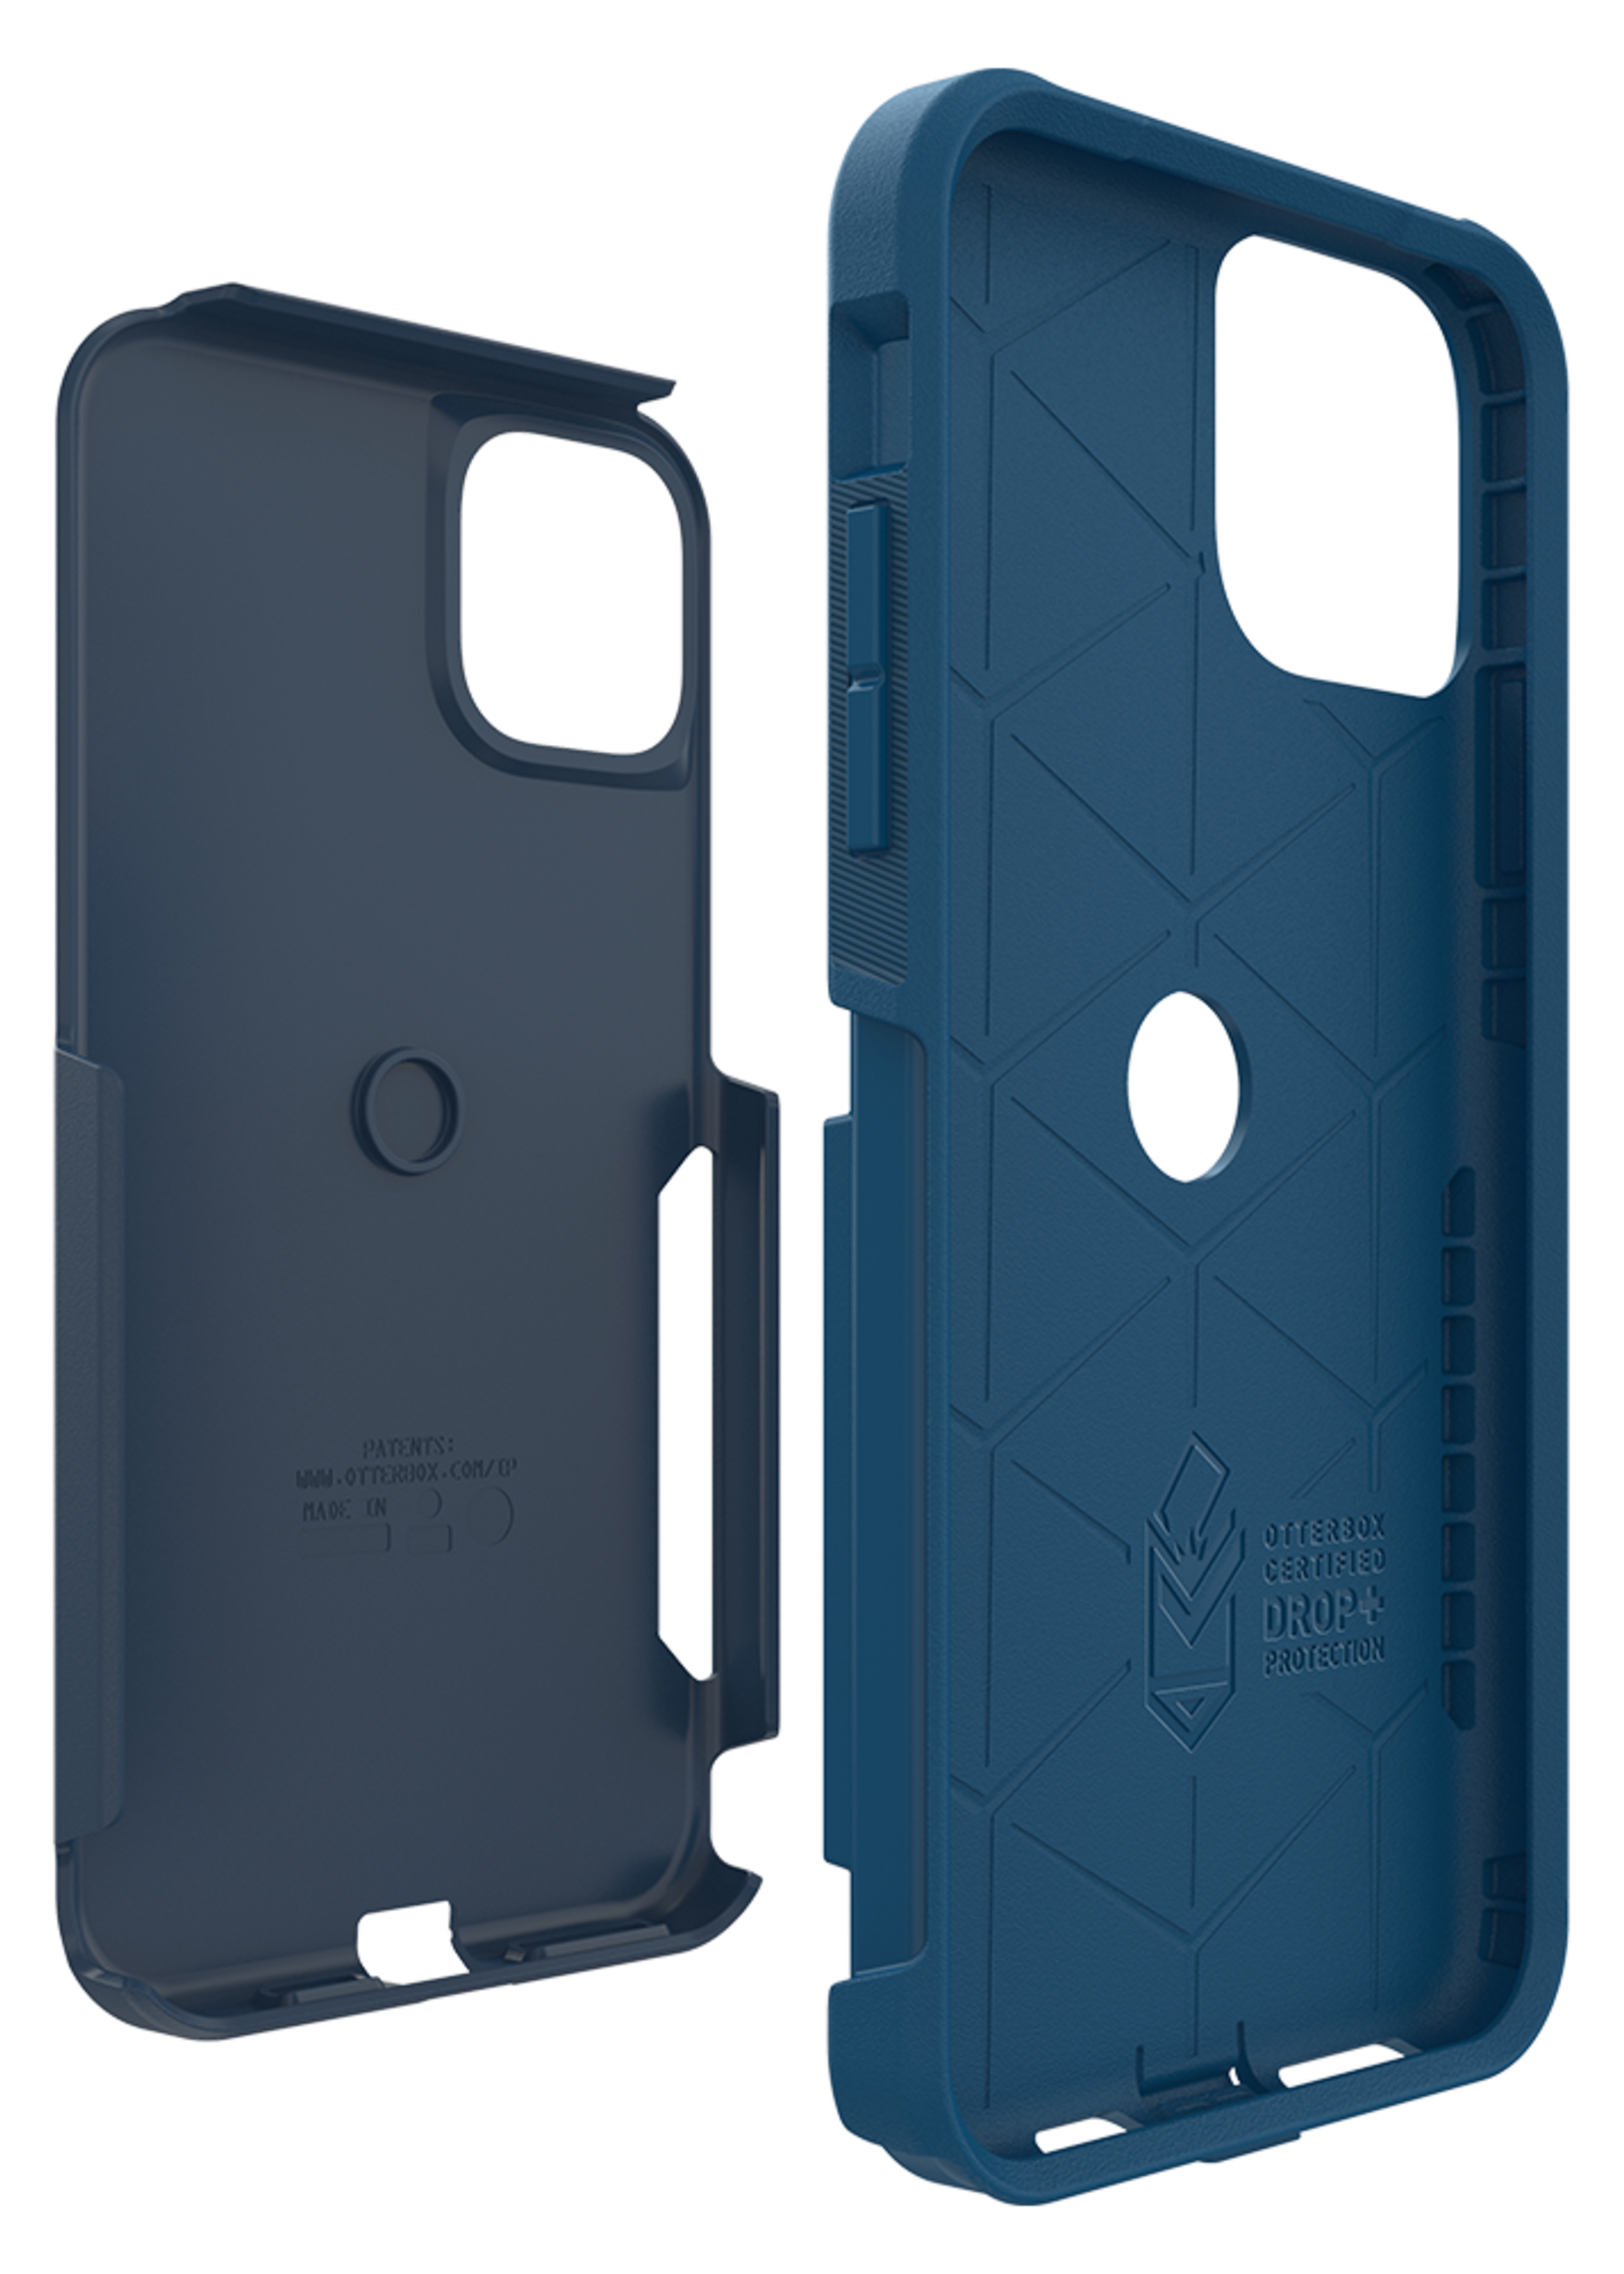 Otterbox OtterBox - Commuter Case for Apple iPhone 11 Pro Max - Bespoke Way